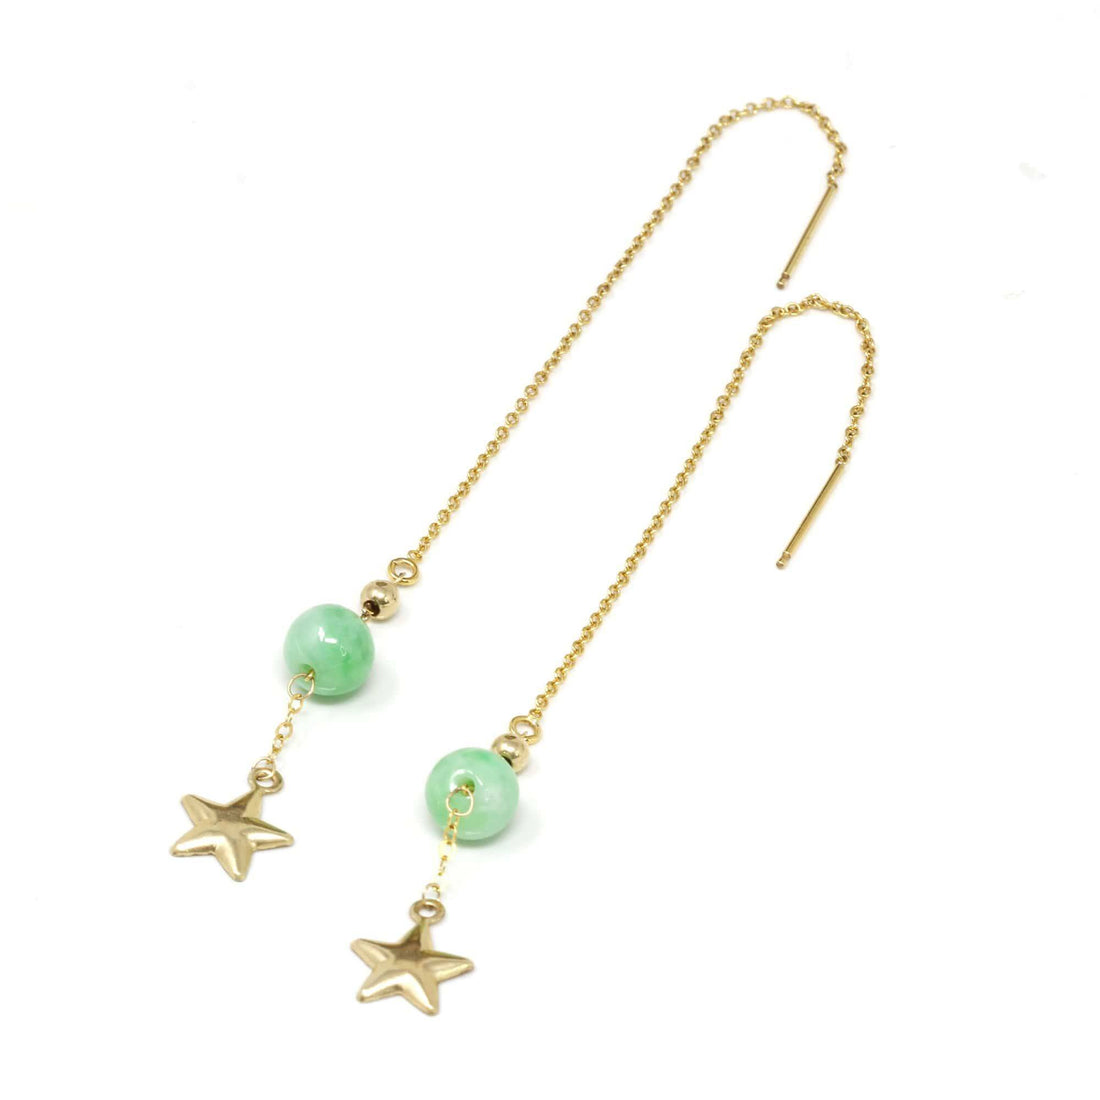 Baikalla Jewelry Gold Jade Earrings Baikalla™ "You are the brightest star to me" 14K Royal Yellow Gold Genuine Jade Jadeite Beads and Gold Star Longer Earrings